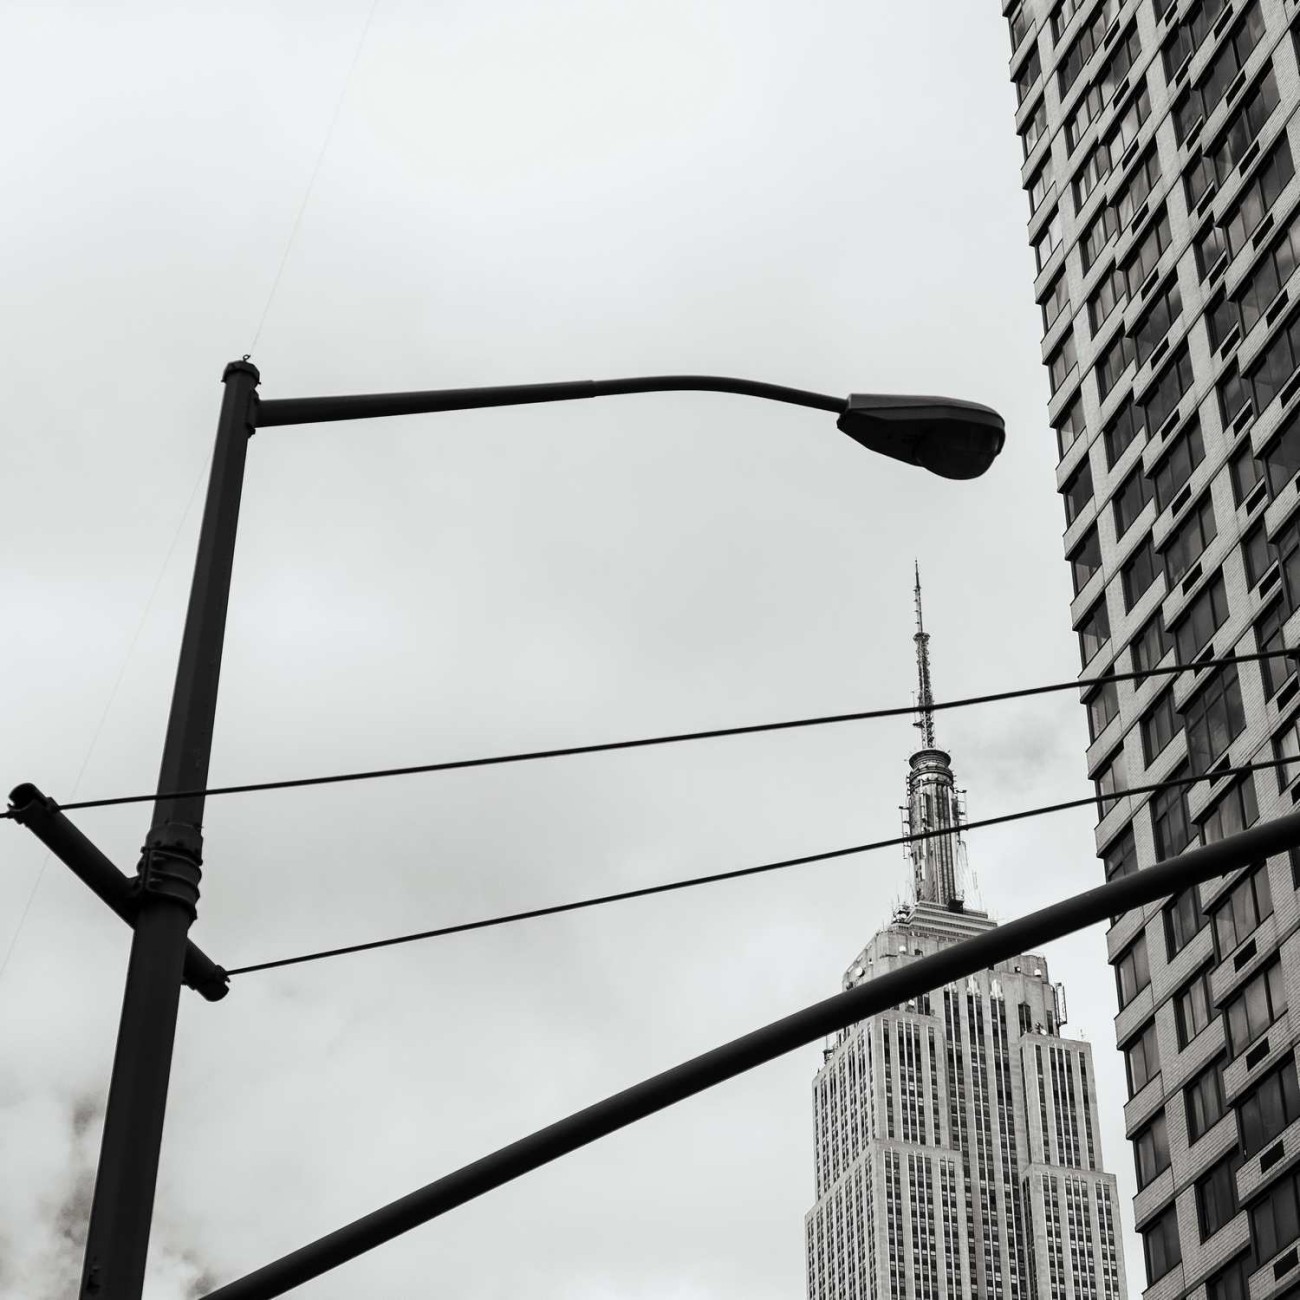 Empire State Building and lamp post, New York, 2014